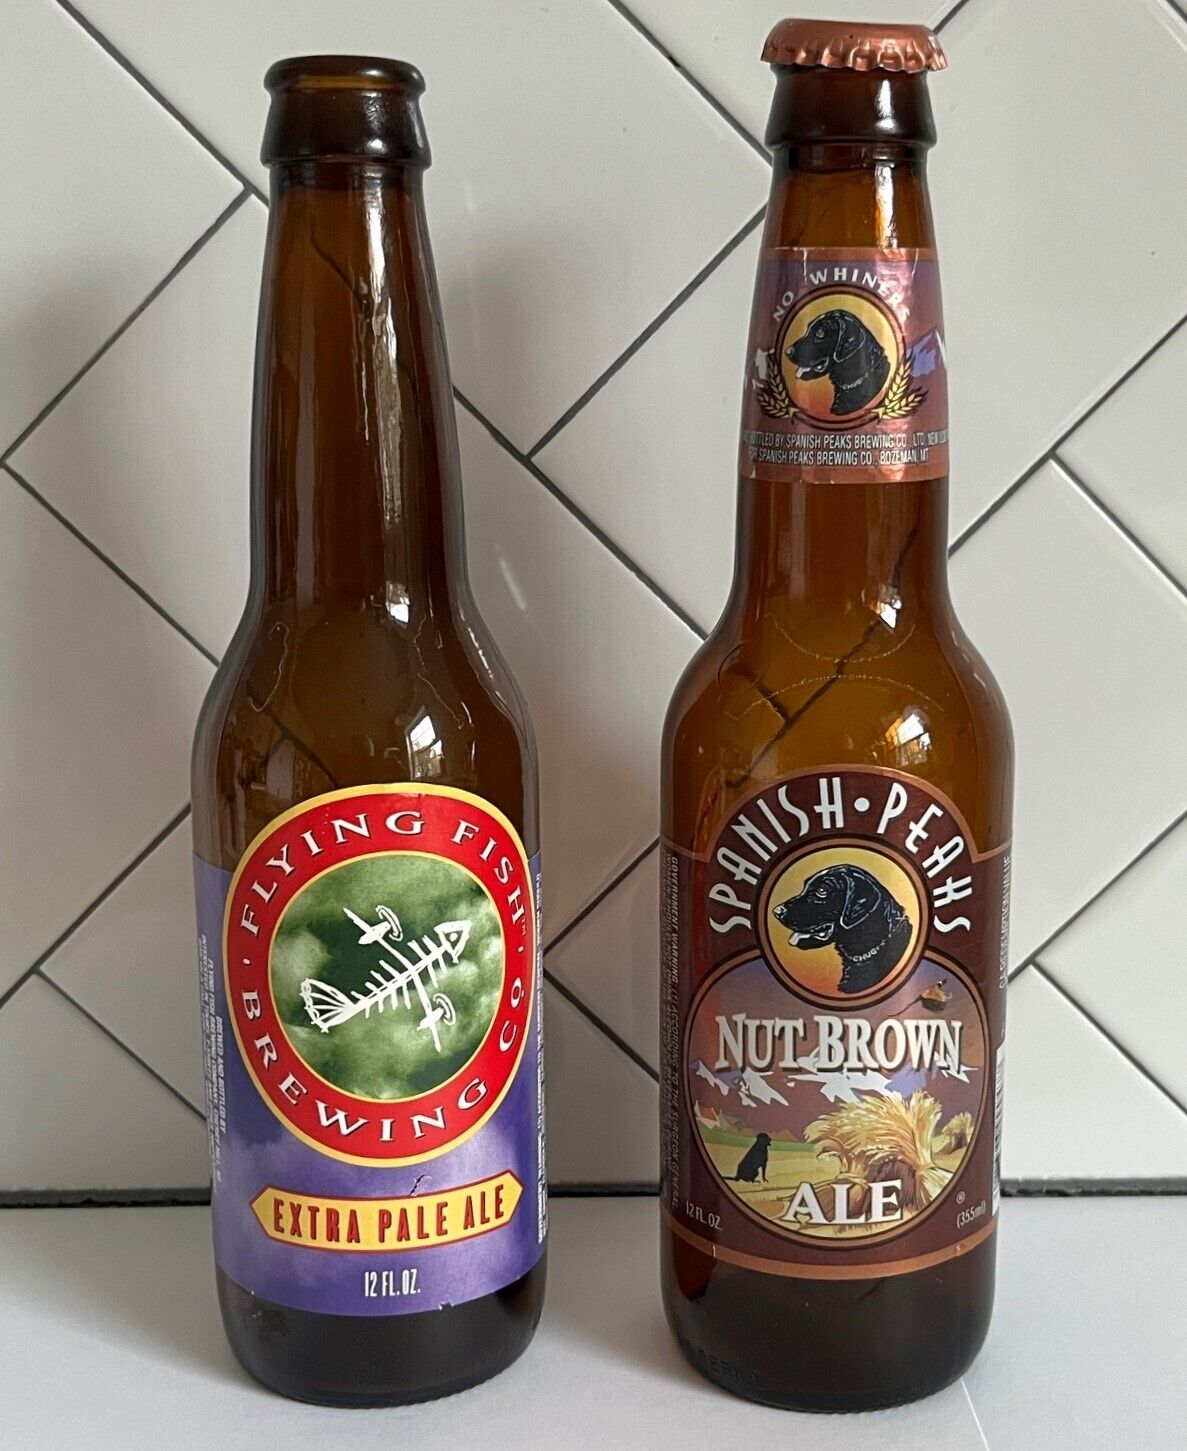 2 beer bottles Spanish Peaks Nut Brown Ale and Flying Fish Extra Pale Ale